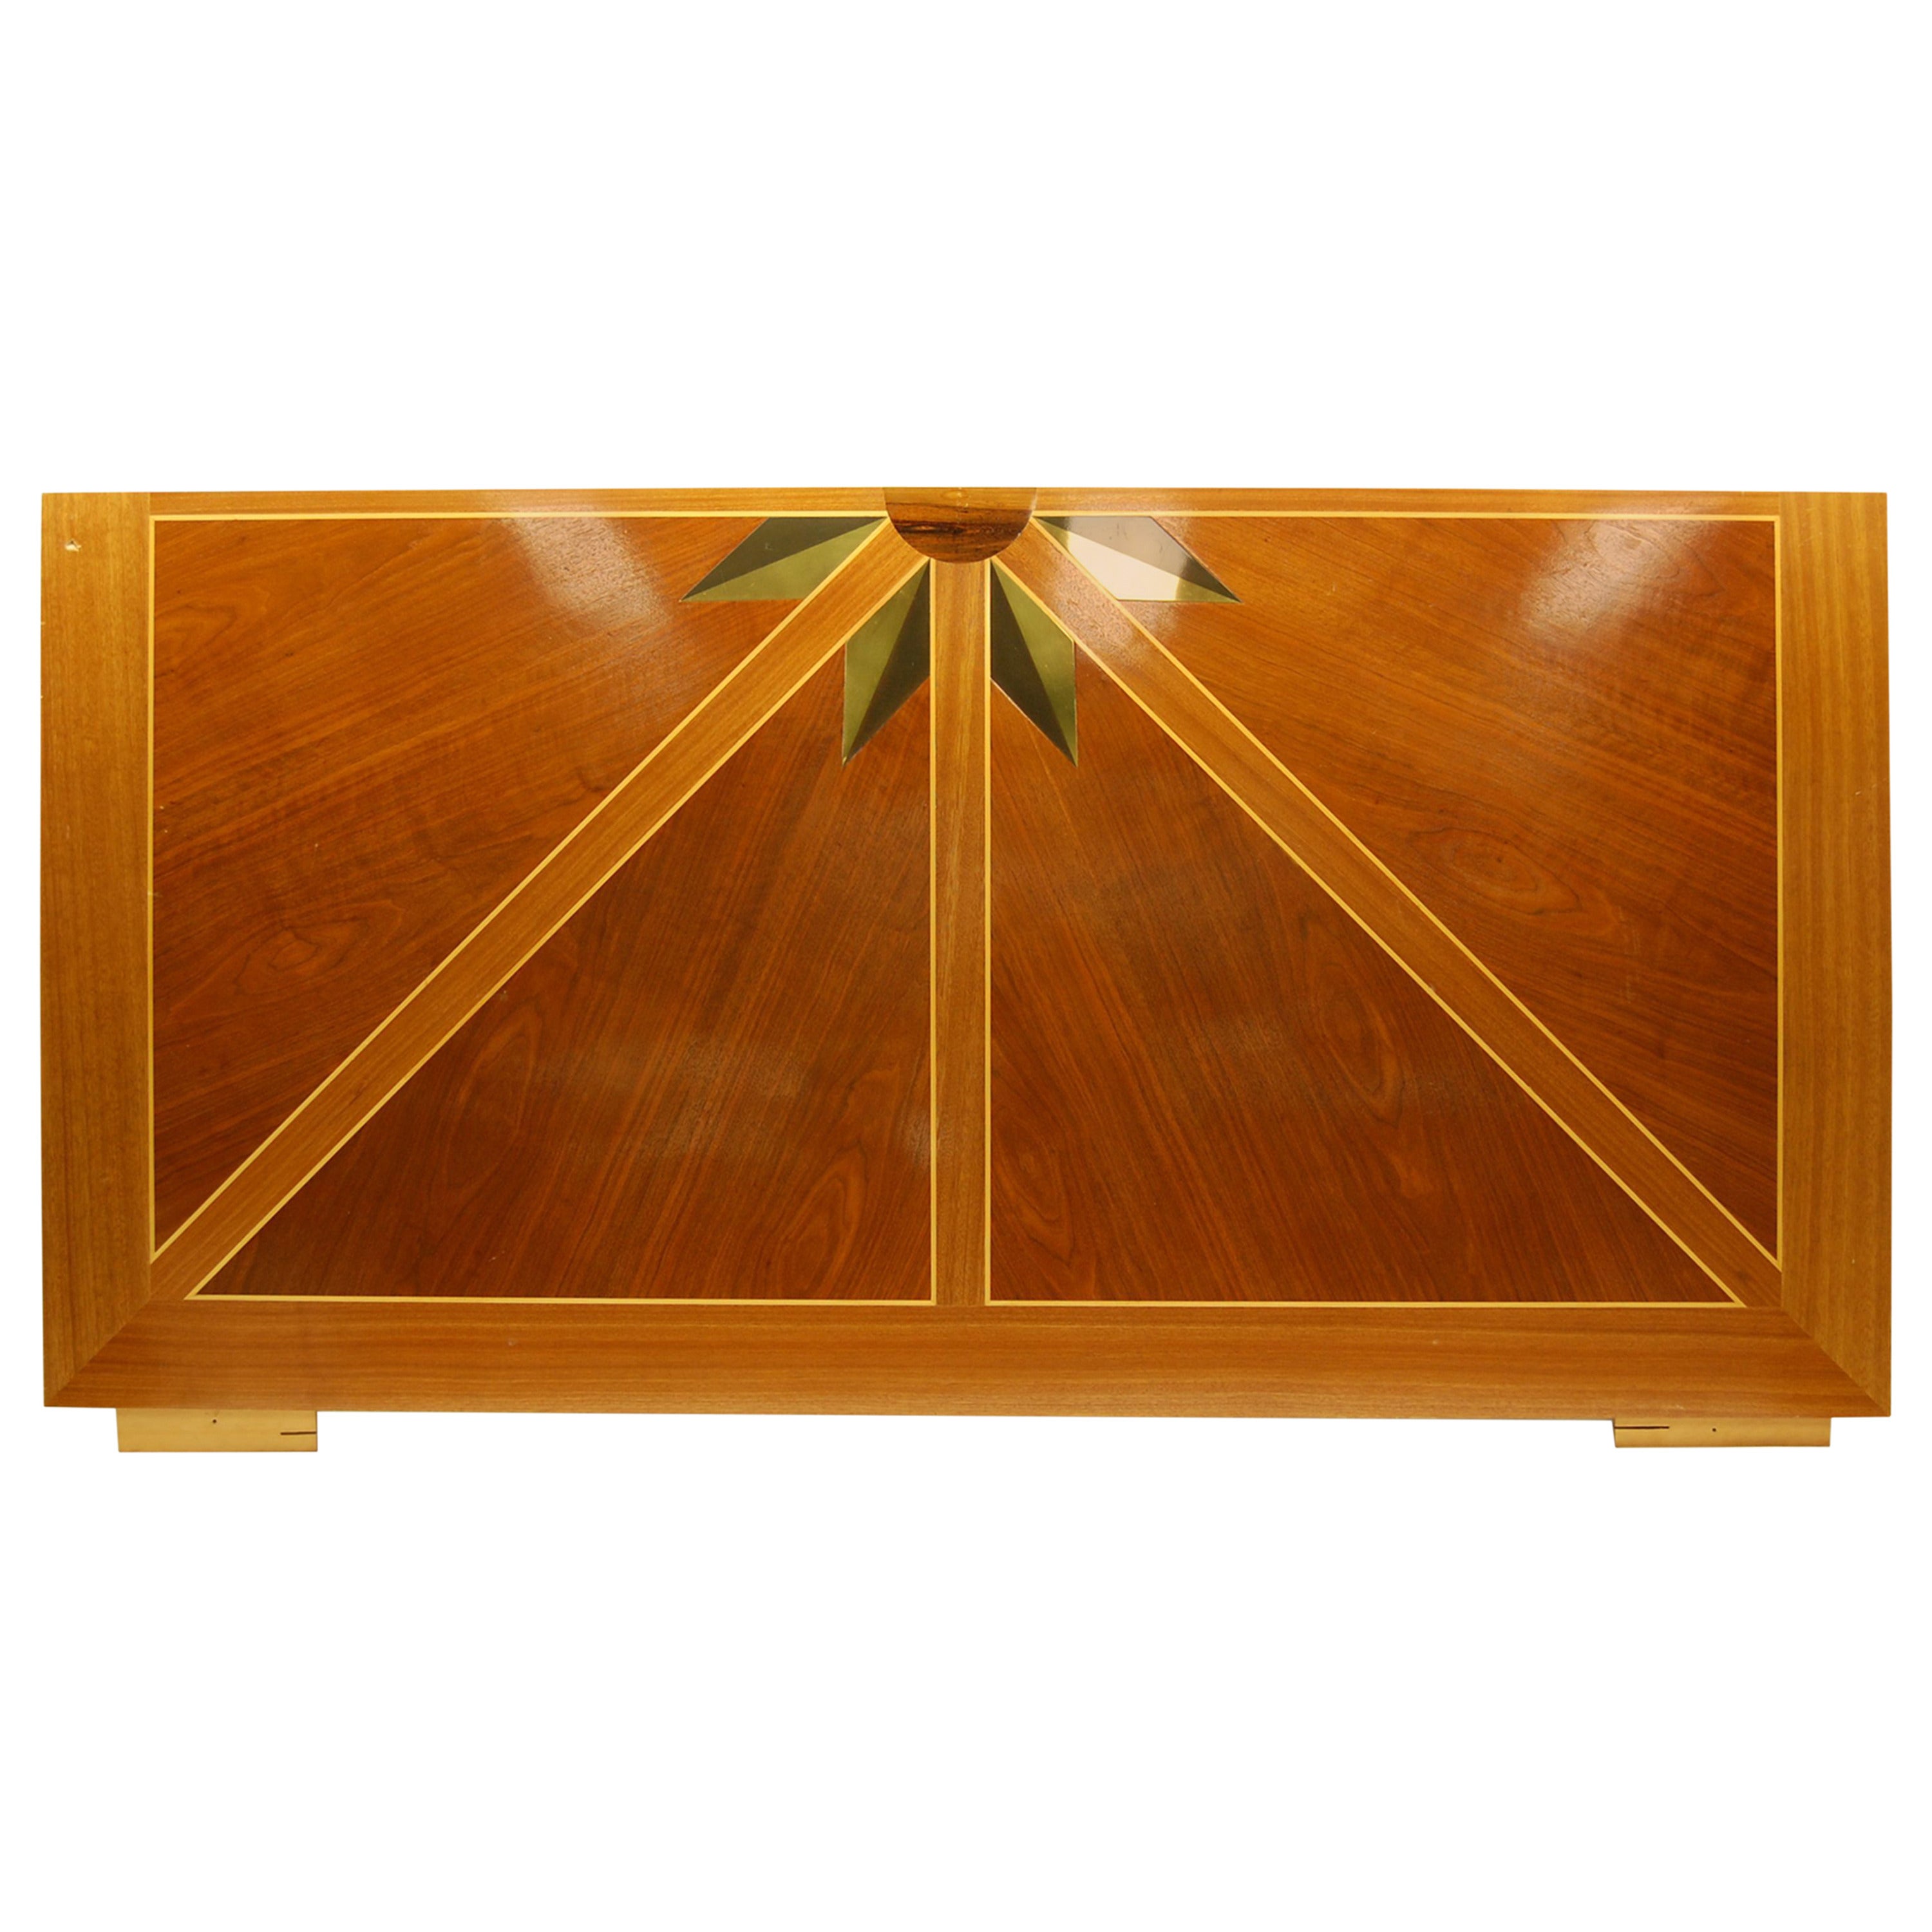 Wooden Architectural Inlaid Panel of Walnut, Maple and Brass For Sale